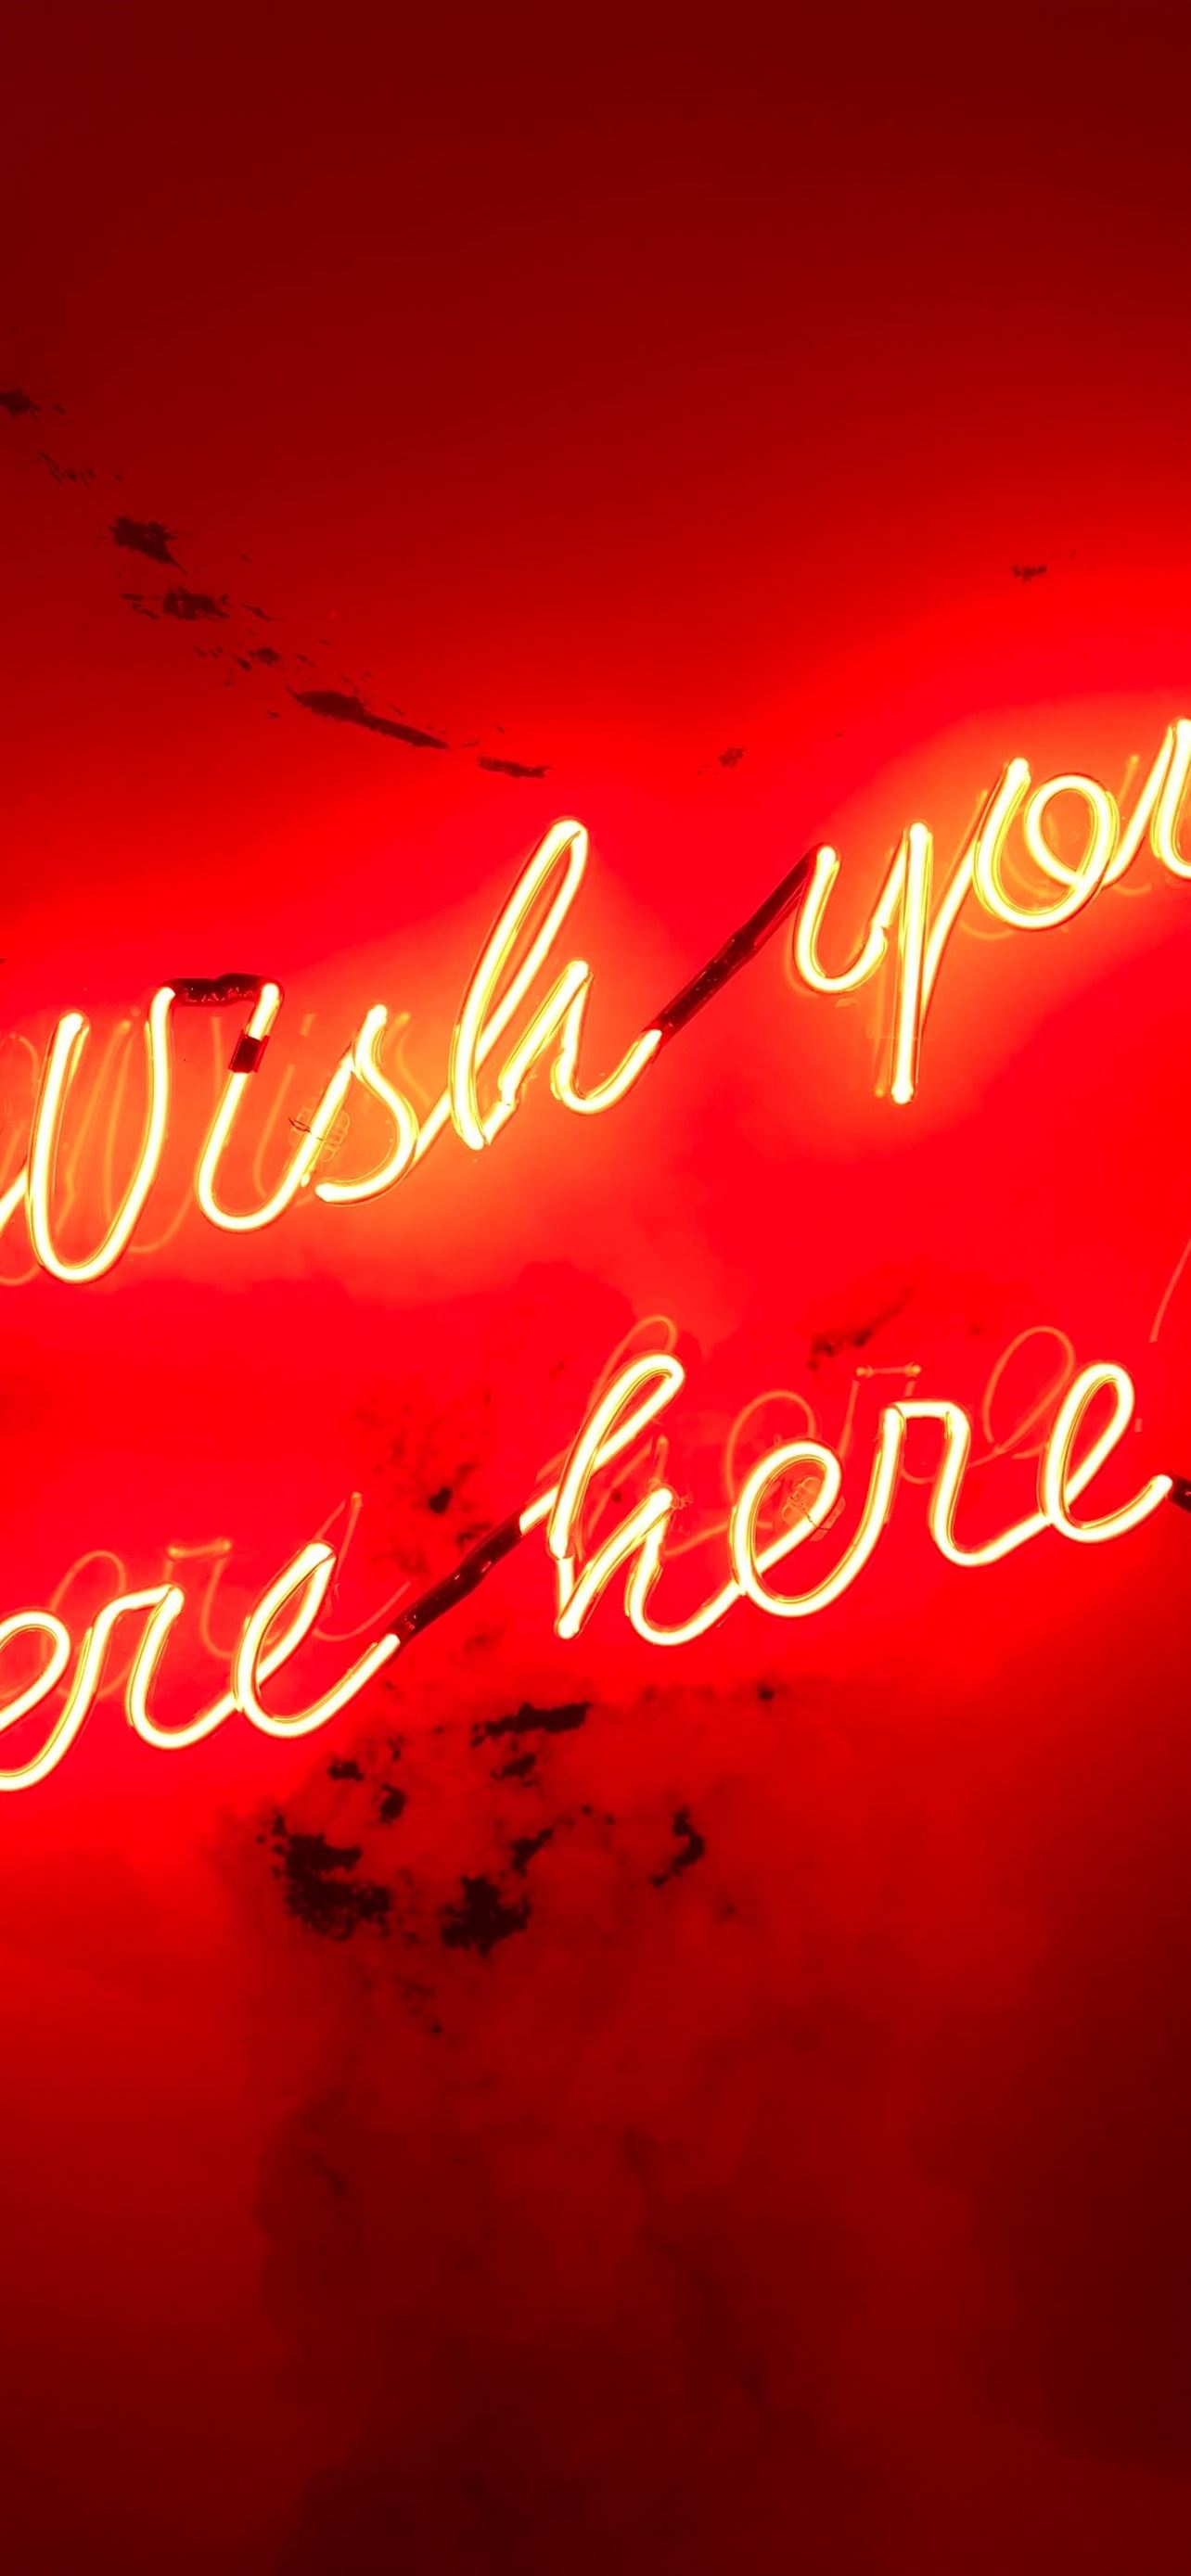 Wallpapers of the week neon signs